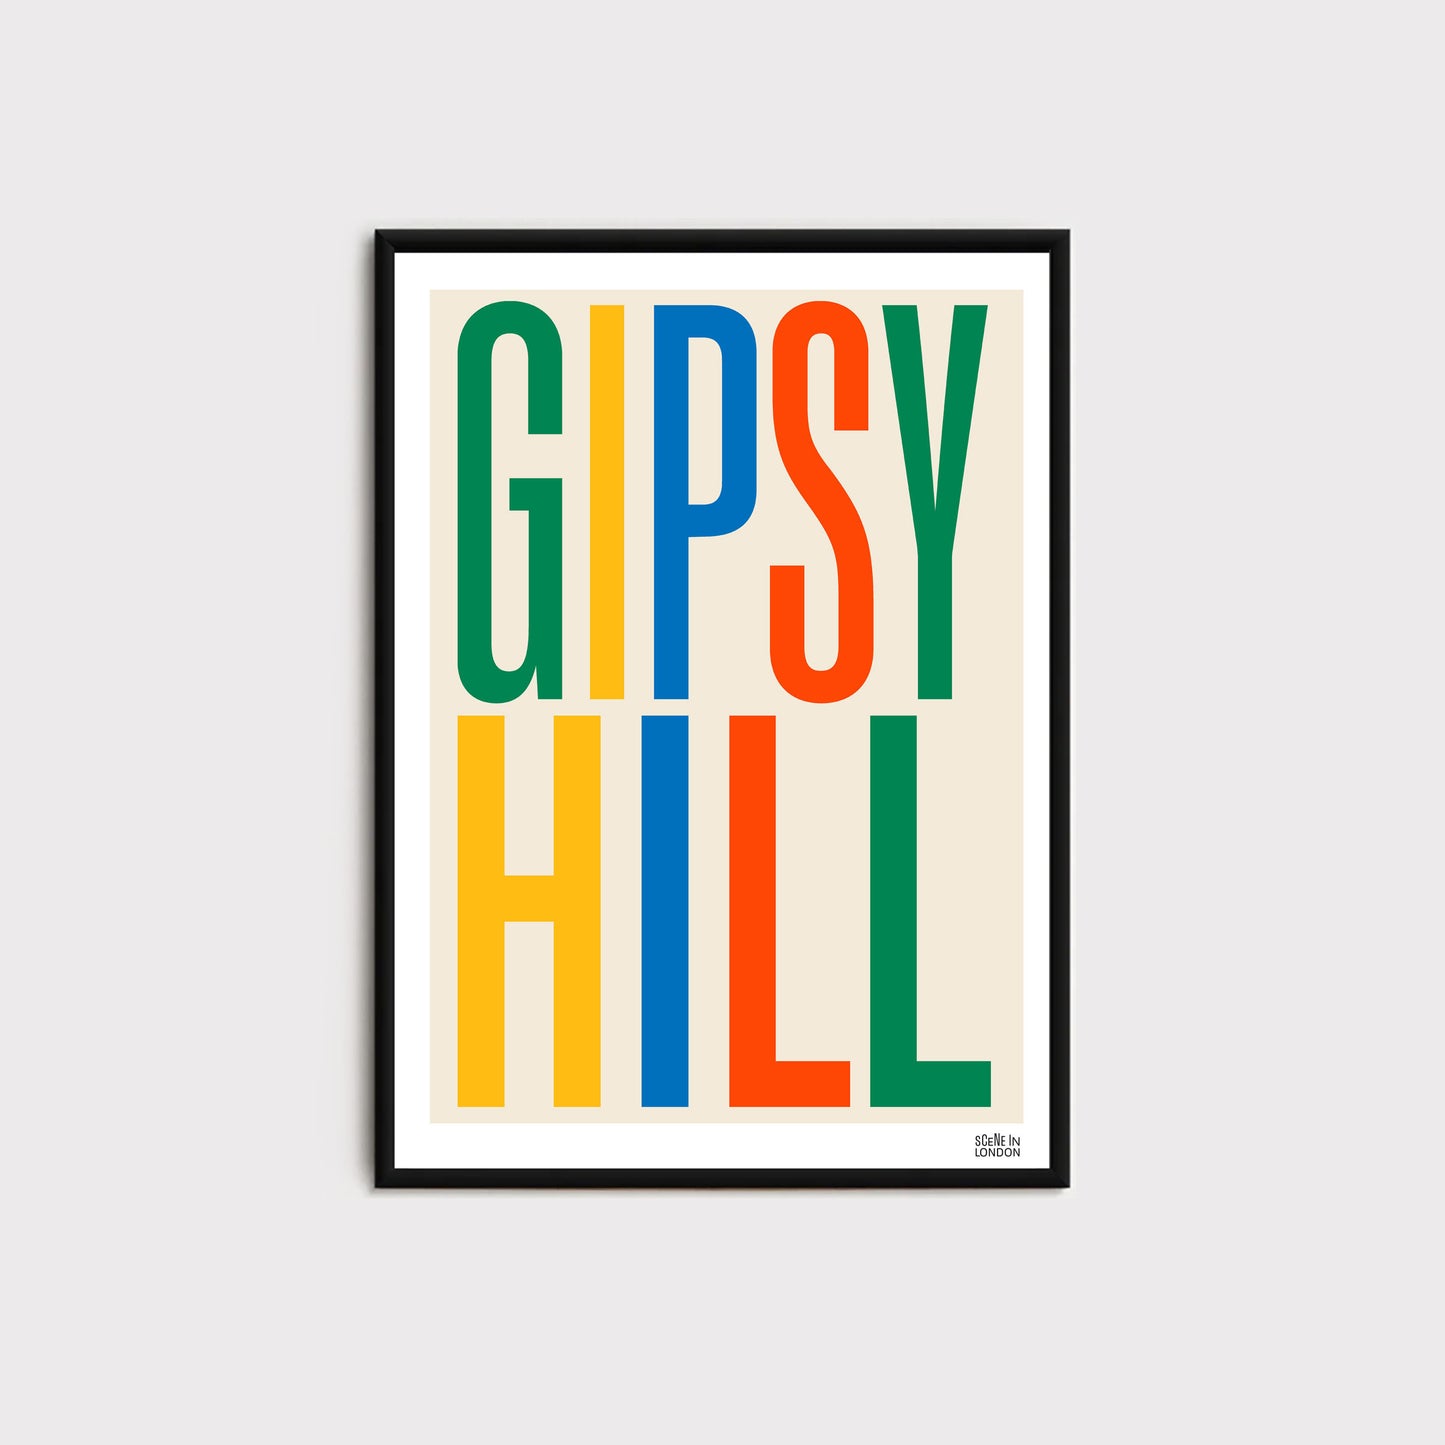 Gipsy Hill Typography Print